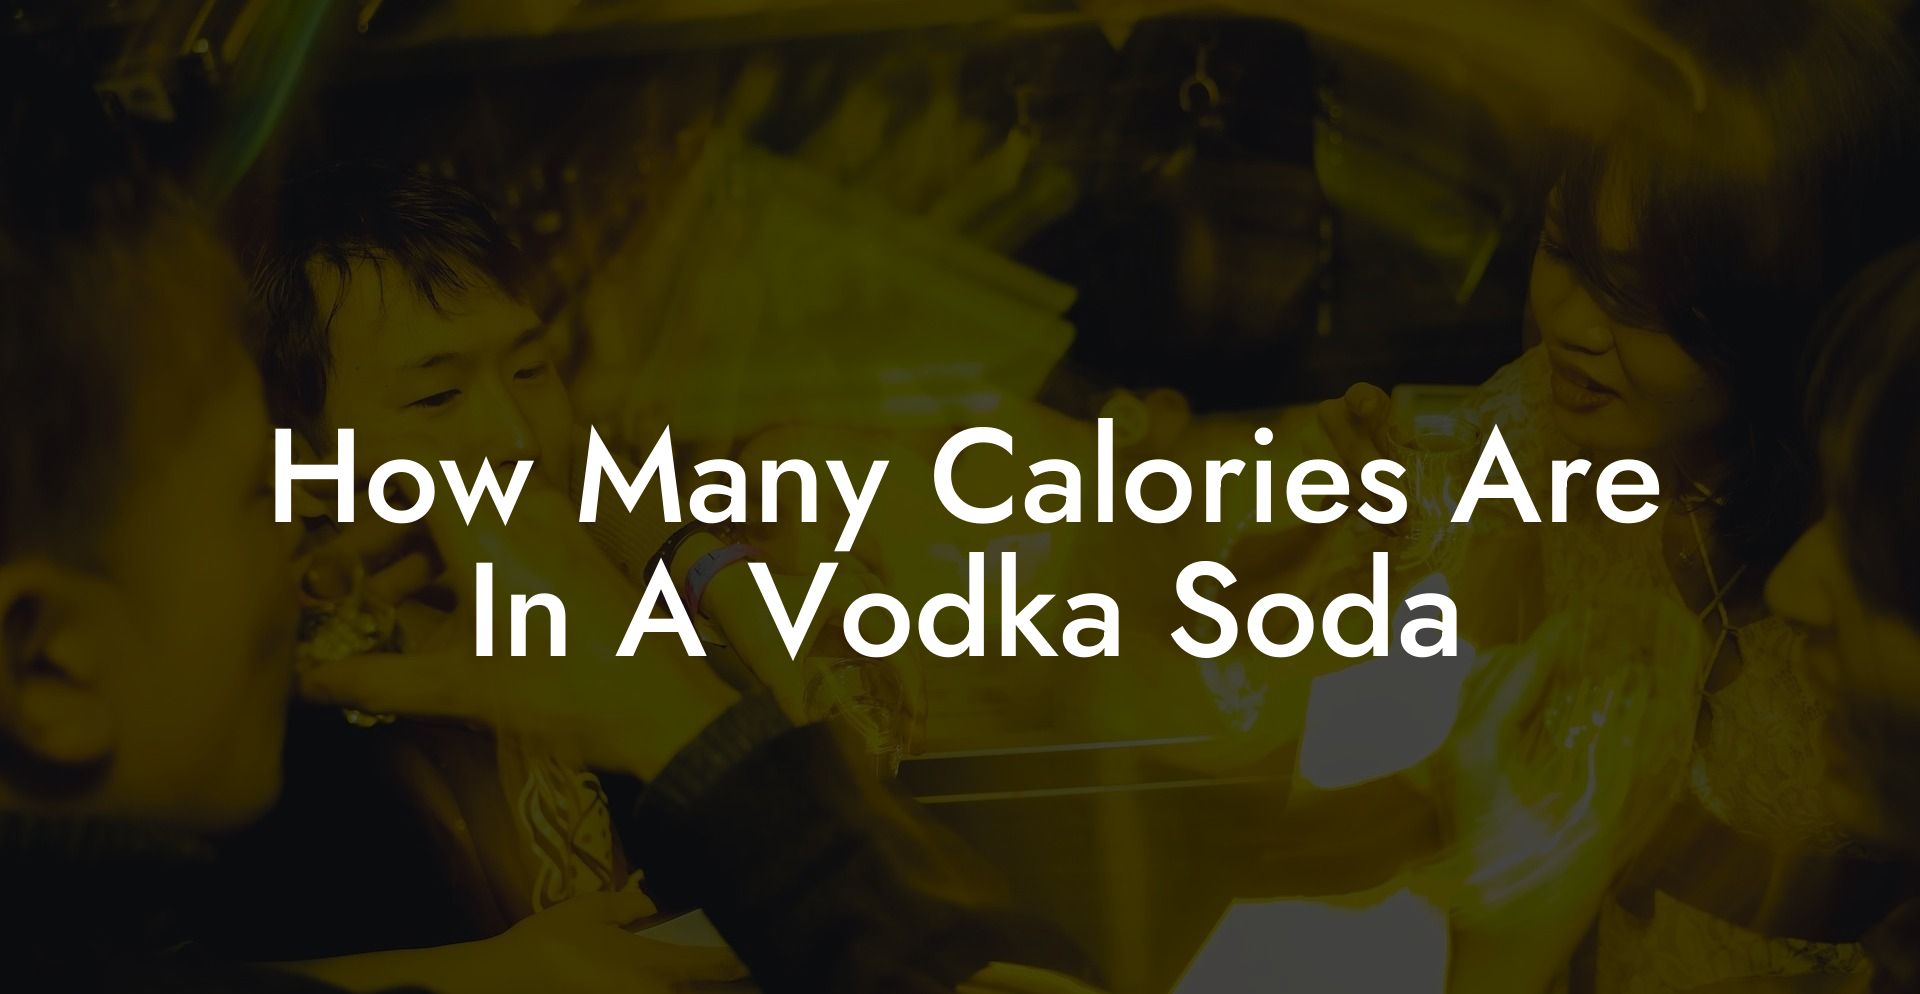 How Many Calories Are In A Vodka Soda